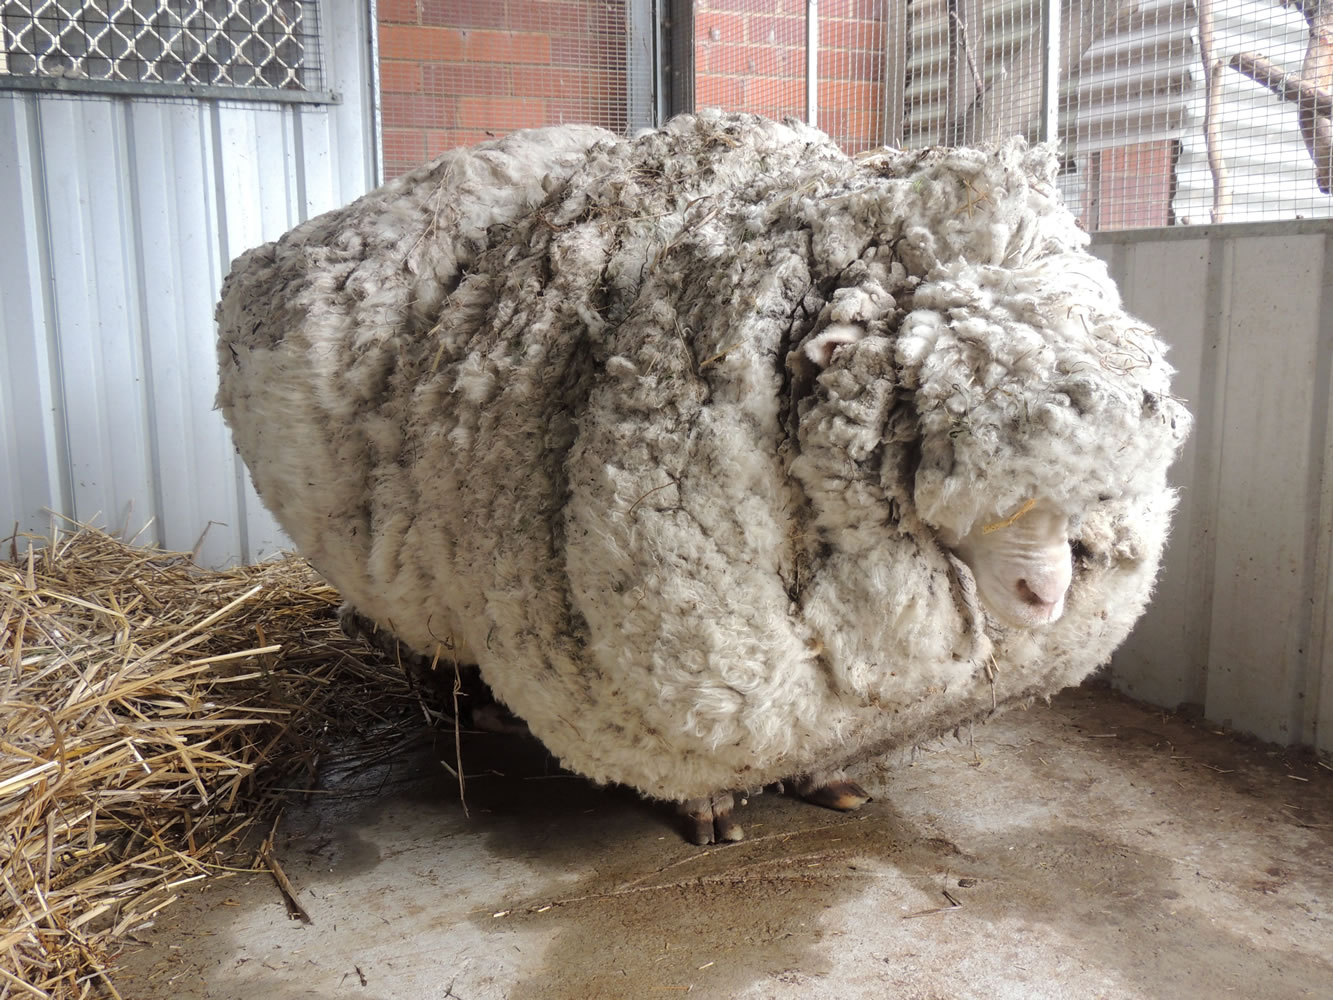 An overgrown sheep found in Australian scrubland is prepared to be shorn in Canberra, Australia, on Thursday. The wild, castrated merino ram named Chris, yielded 89 pounds of wool — the equivalent of 30 sweaters &oacute; and sheded almost half his body weight.